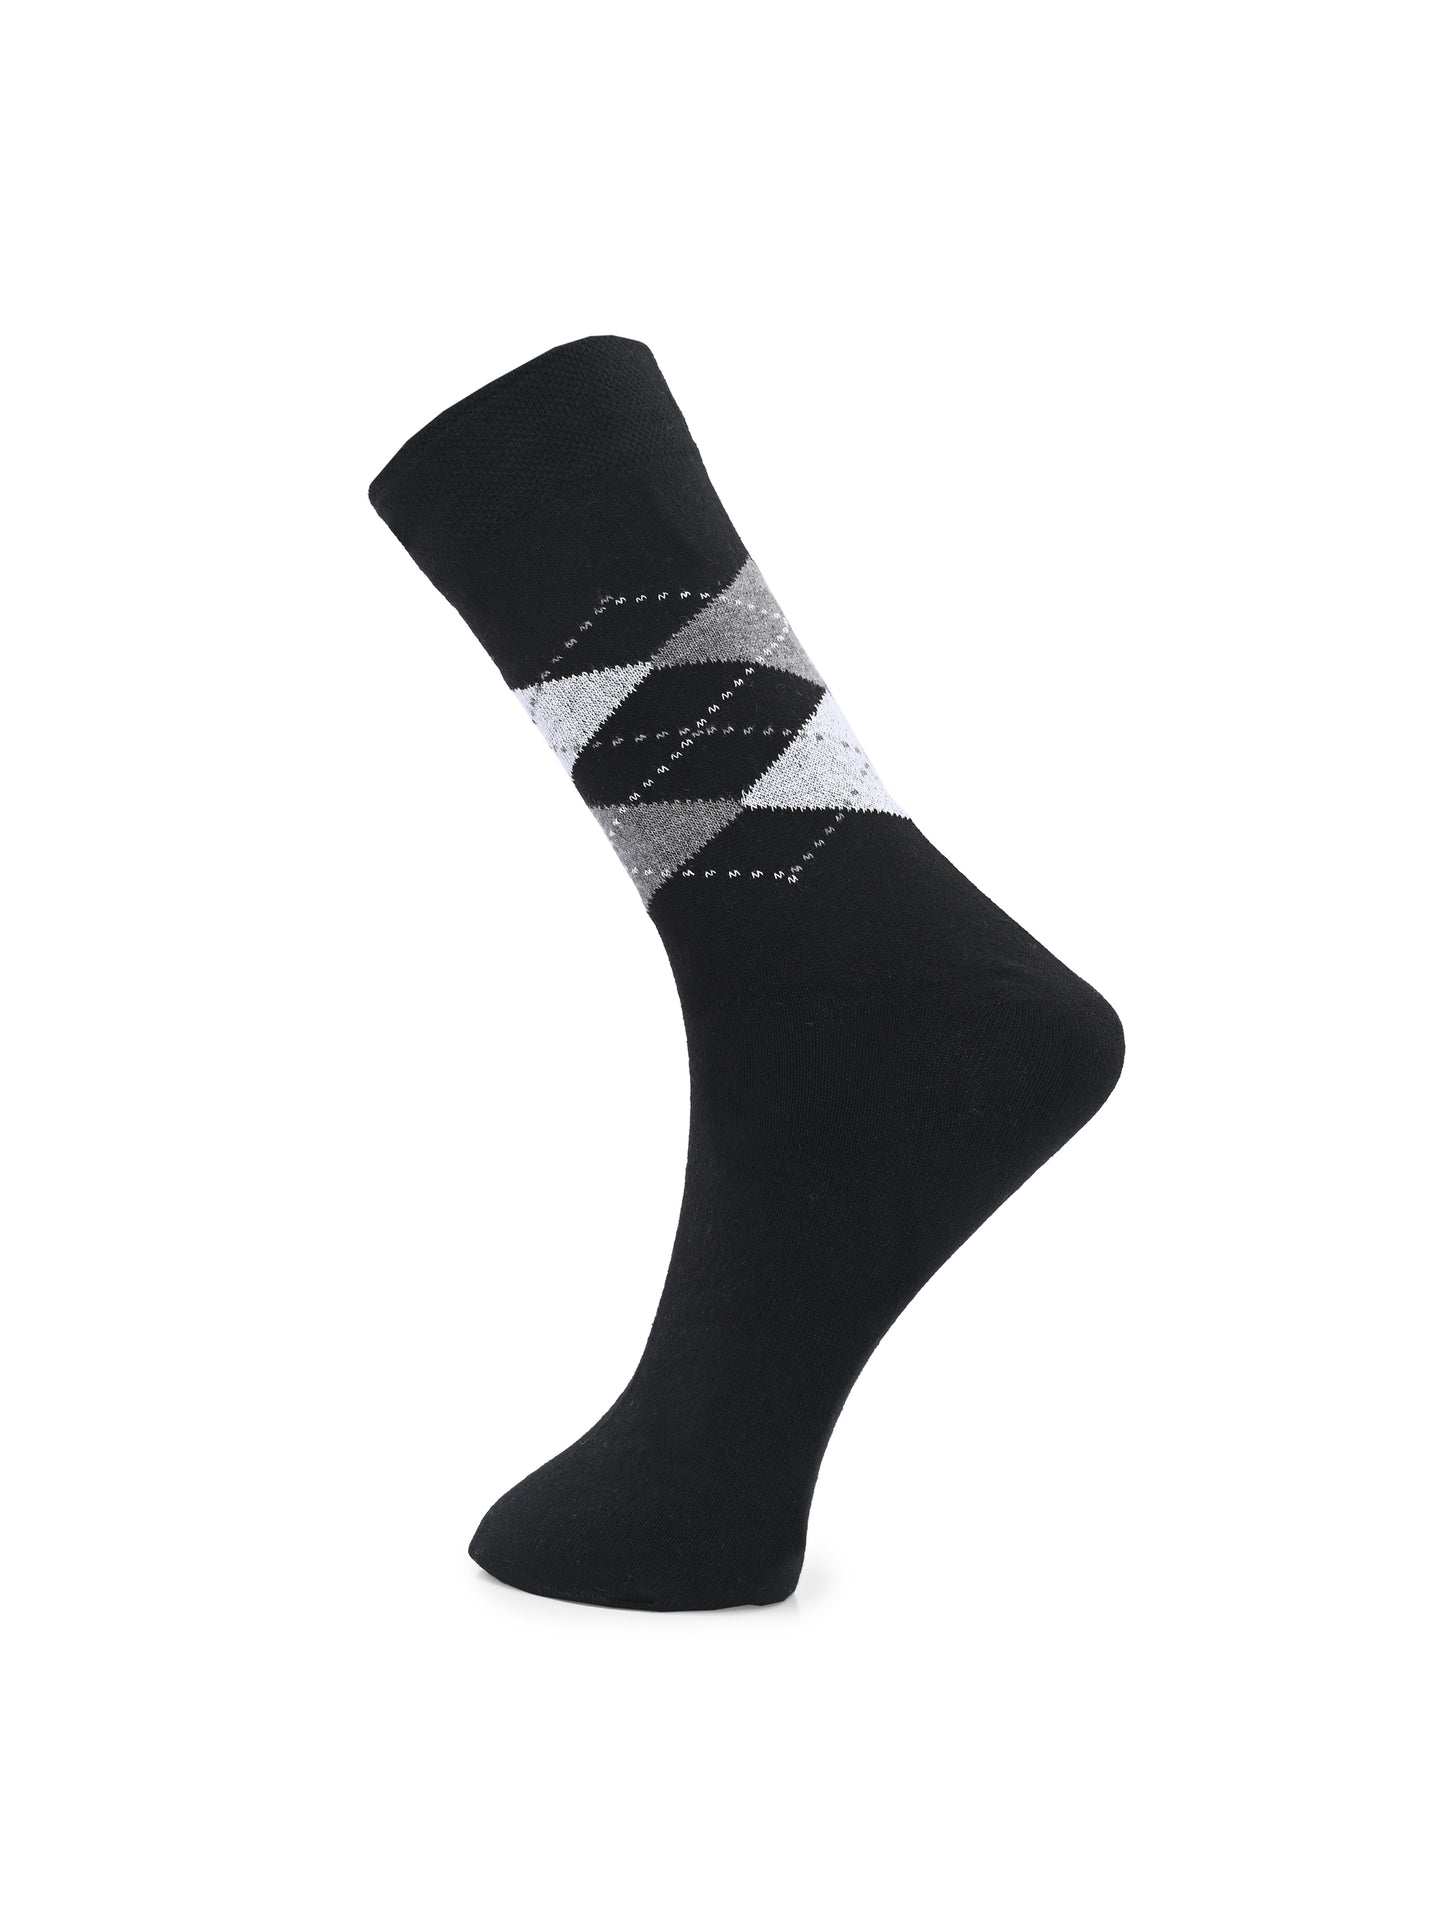 Hirolas Cotton Anti-Odour Breathable Antibacterial business Formal/office wear Crew full length Socks for Men (Free Size) | Made with 100% Combed Cotton and Spandex (Navy, Black,  Grey) - Pack of 3 socks